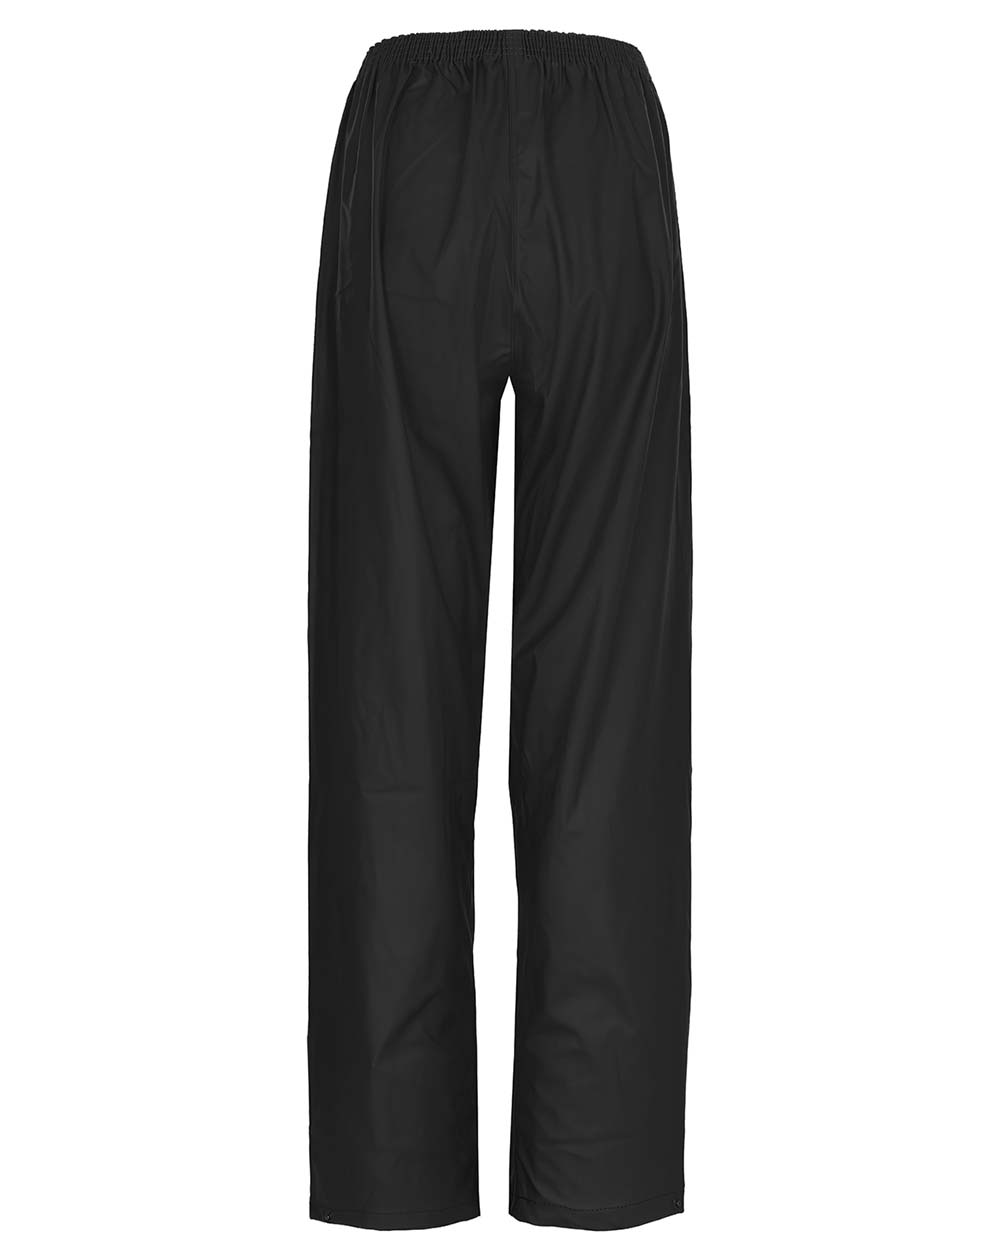 Back view Fort Airflex Waterproof Breathable Trousers in Black 